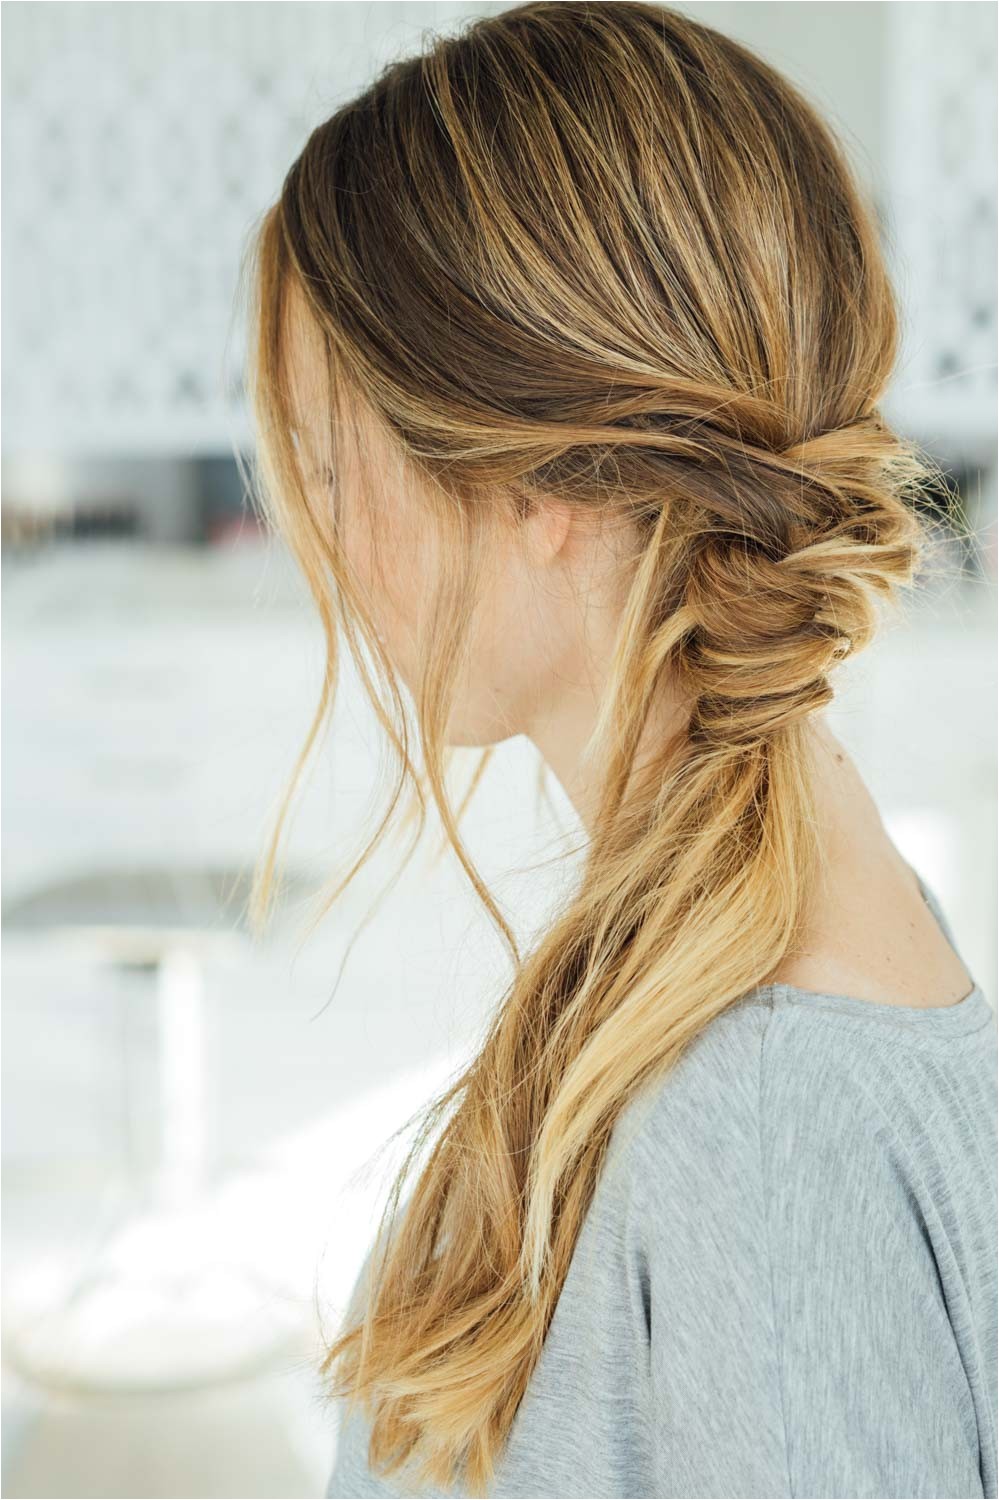 16 easy hairstyles for hot summer days